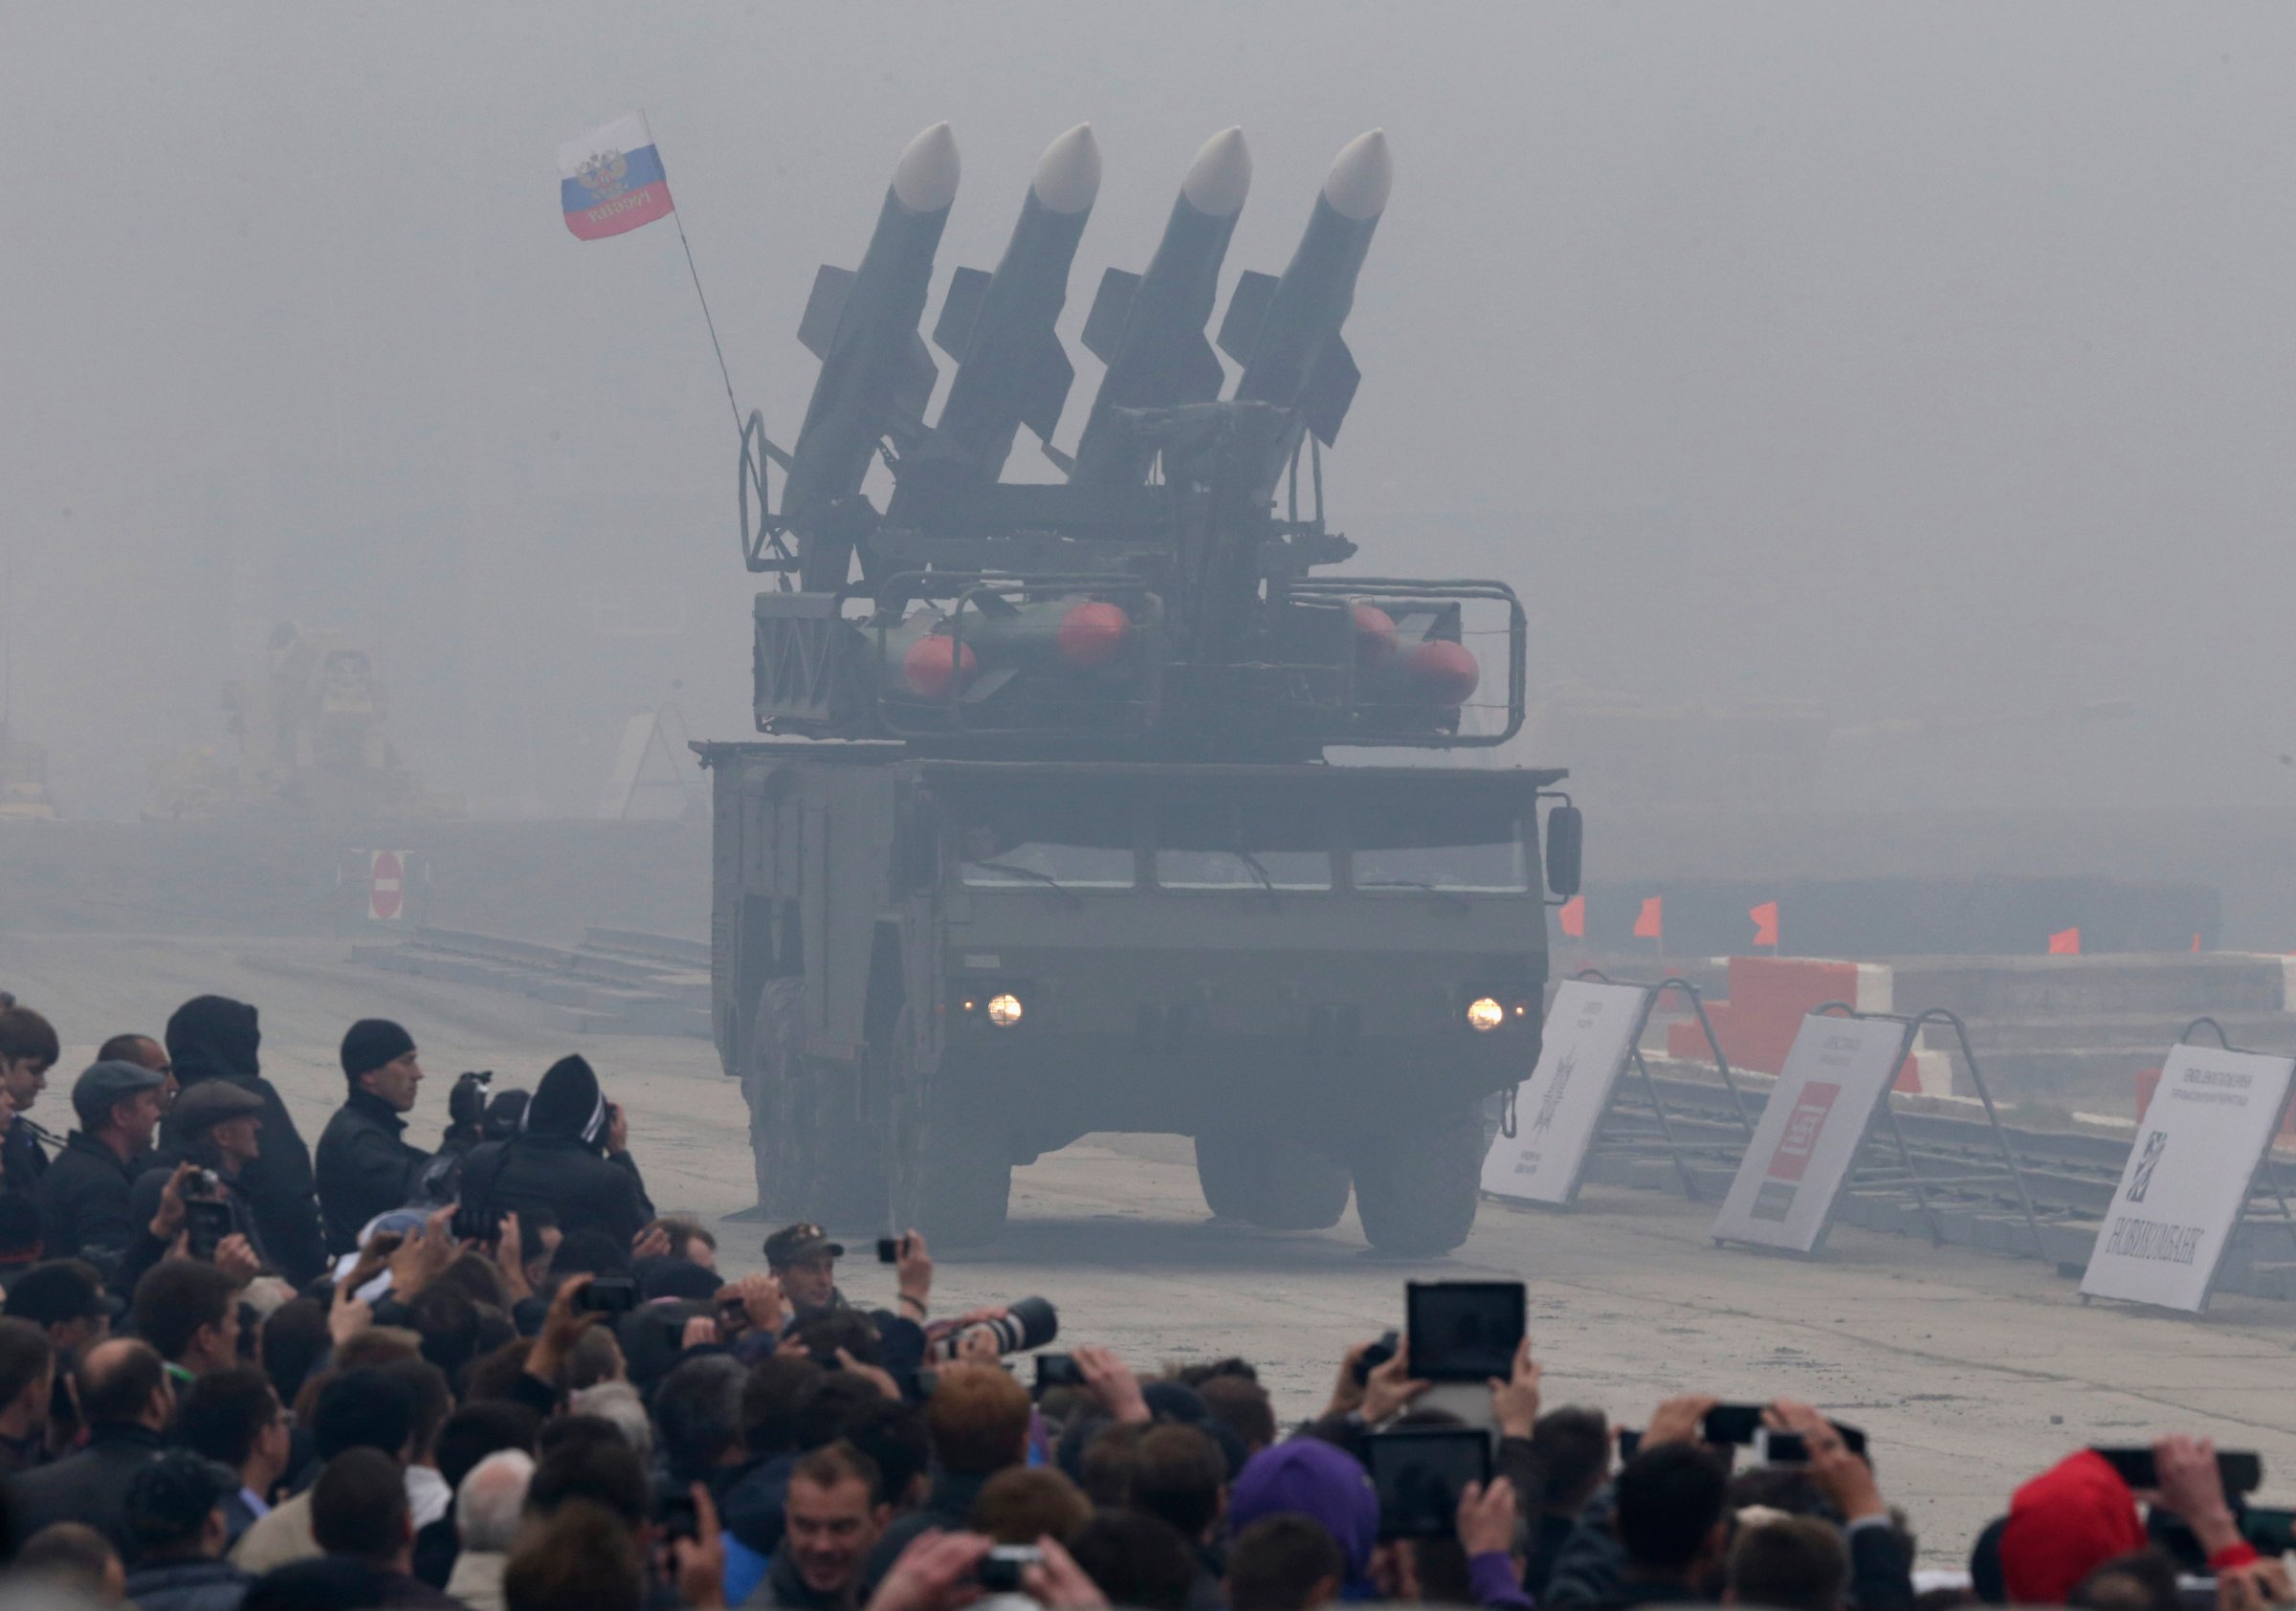 Spectators watch a Russian "Buk" missile system being driven during the "Russia Arms Expo 2013" 9th international exhibition of arms, military equipment and ammunition, in the Urals city of Nizhny Tagil